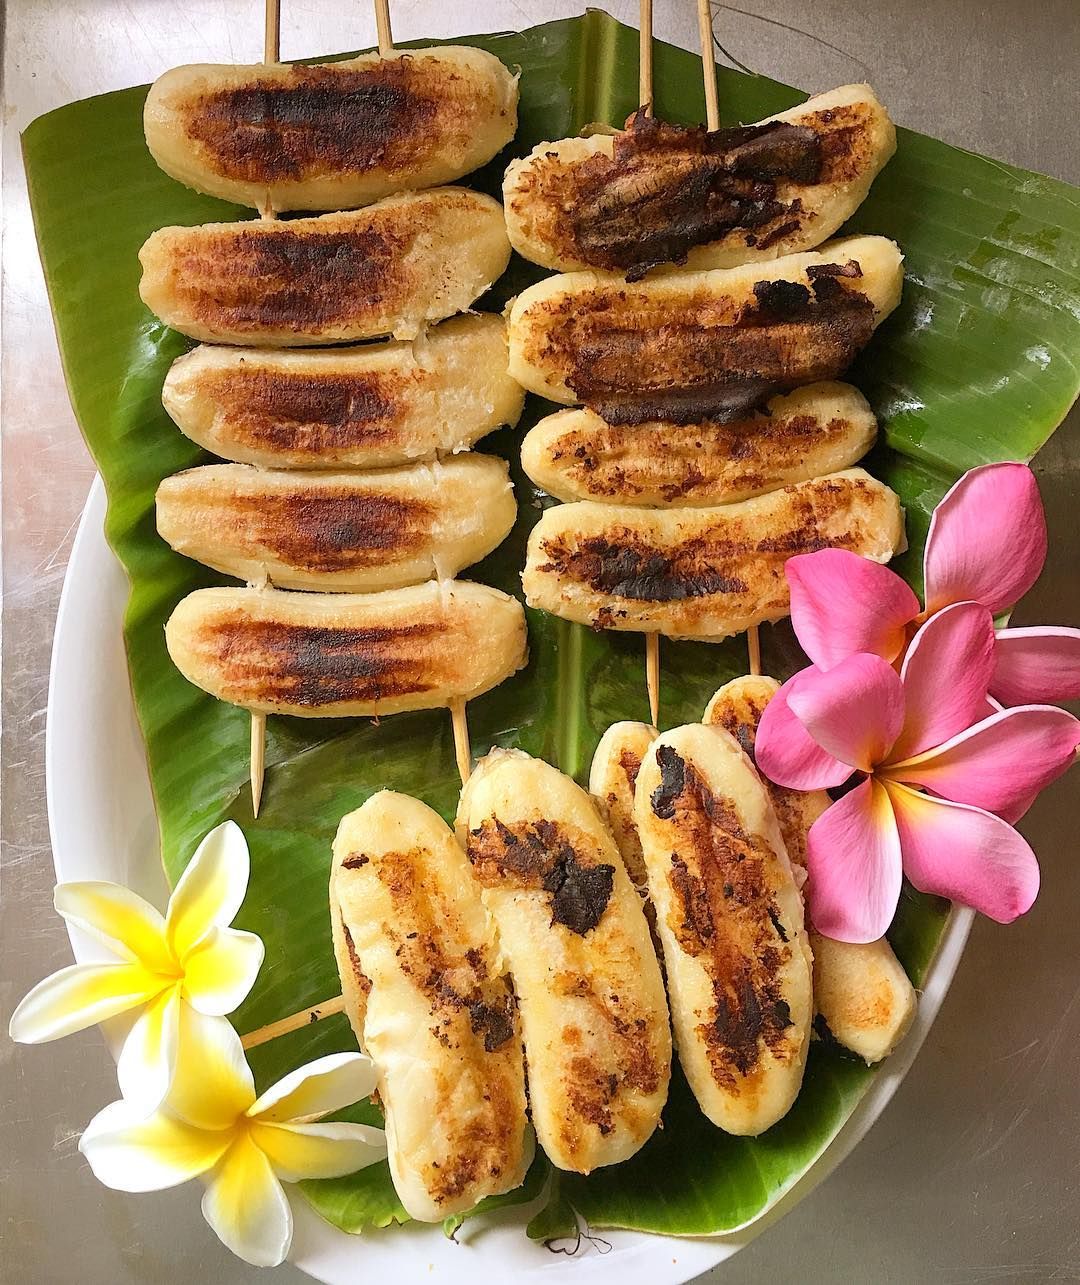 Grilled Banana - Top 10 foods you must try once visiting Bangkok 